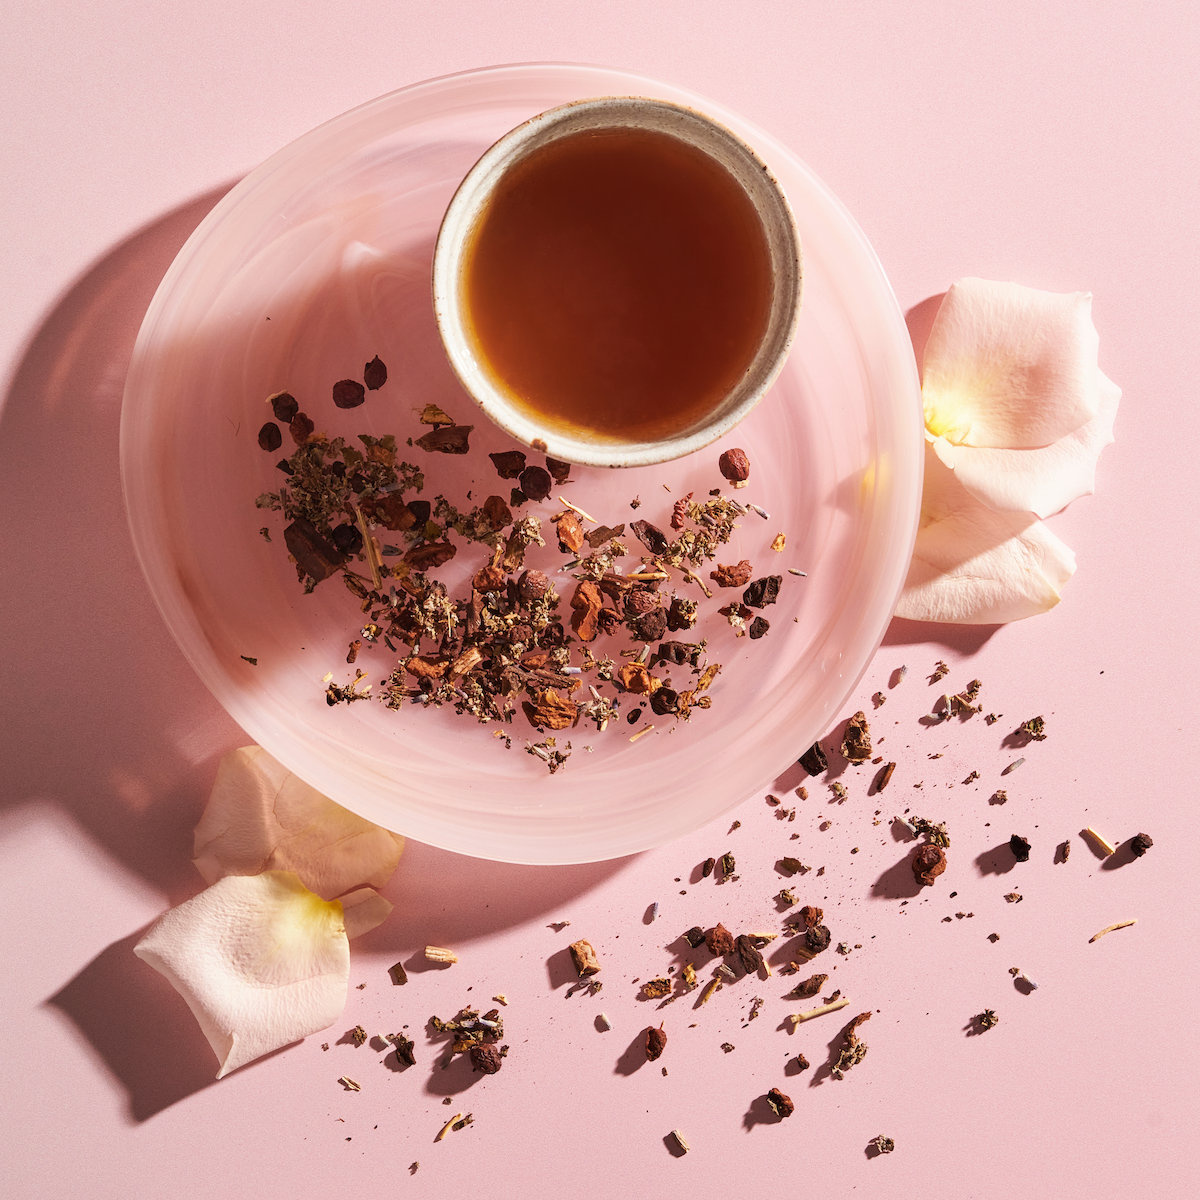 A delicate tea setup featuring a cup filled with Magic Hour's The Empress: Lavender Currant Shatavari Cocoa Tea of Nurturing Creativity on a pink saucer, surrounded by dried tea leaves and pink rose petals, all placed on a pink background. The arrangement has a soft and calming aesthetic.